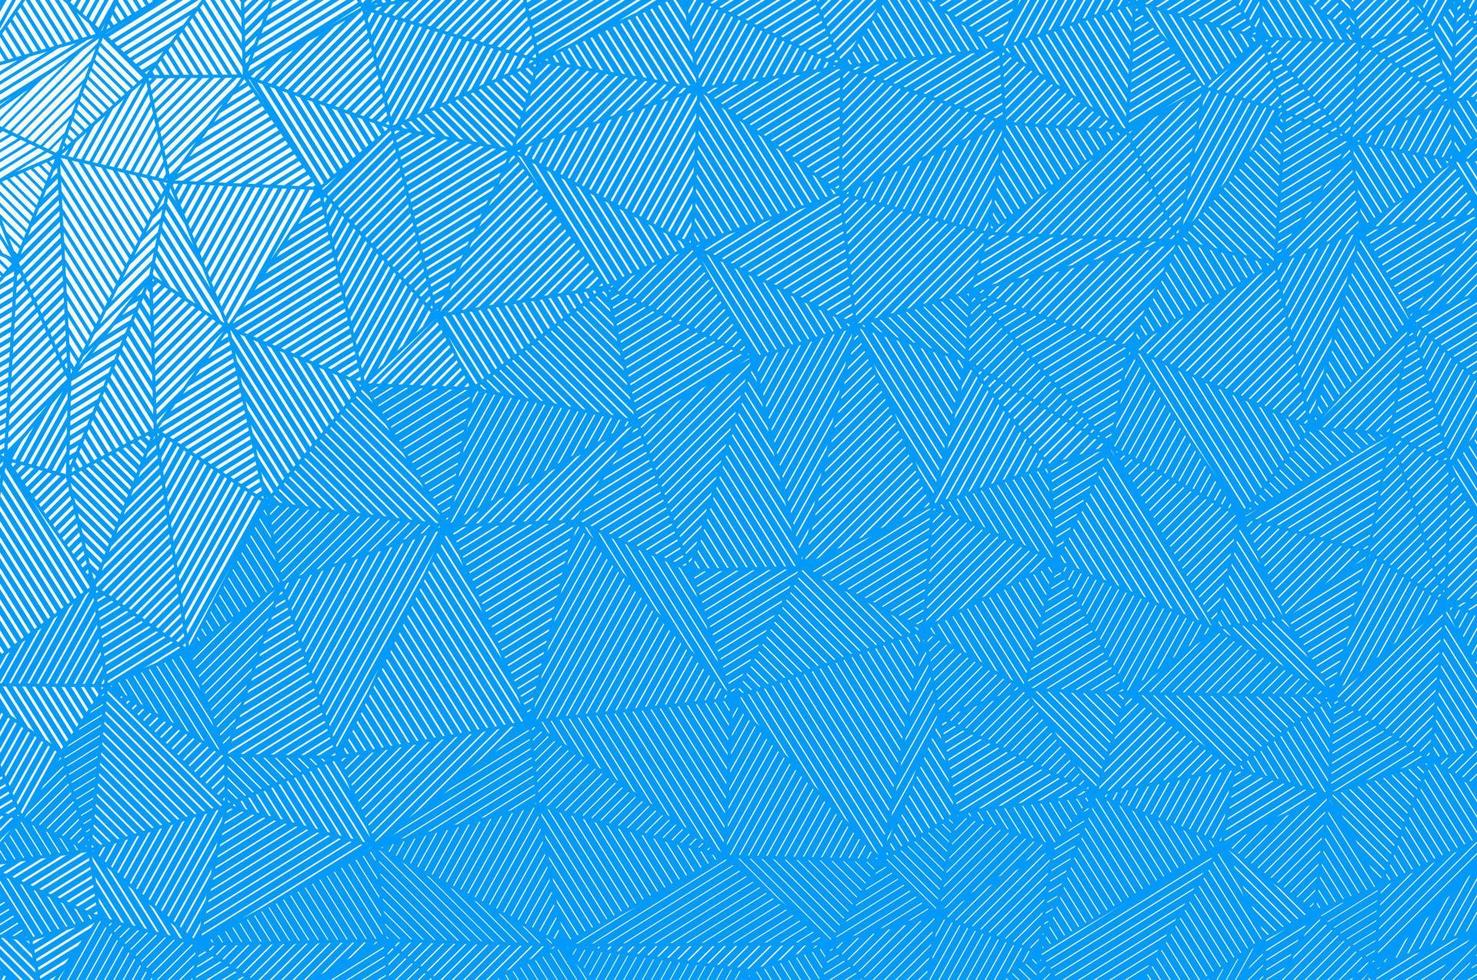 Abstract polygonal vector texture. Low poly triangular shades made by parallel straight lines.